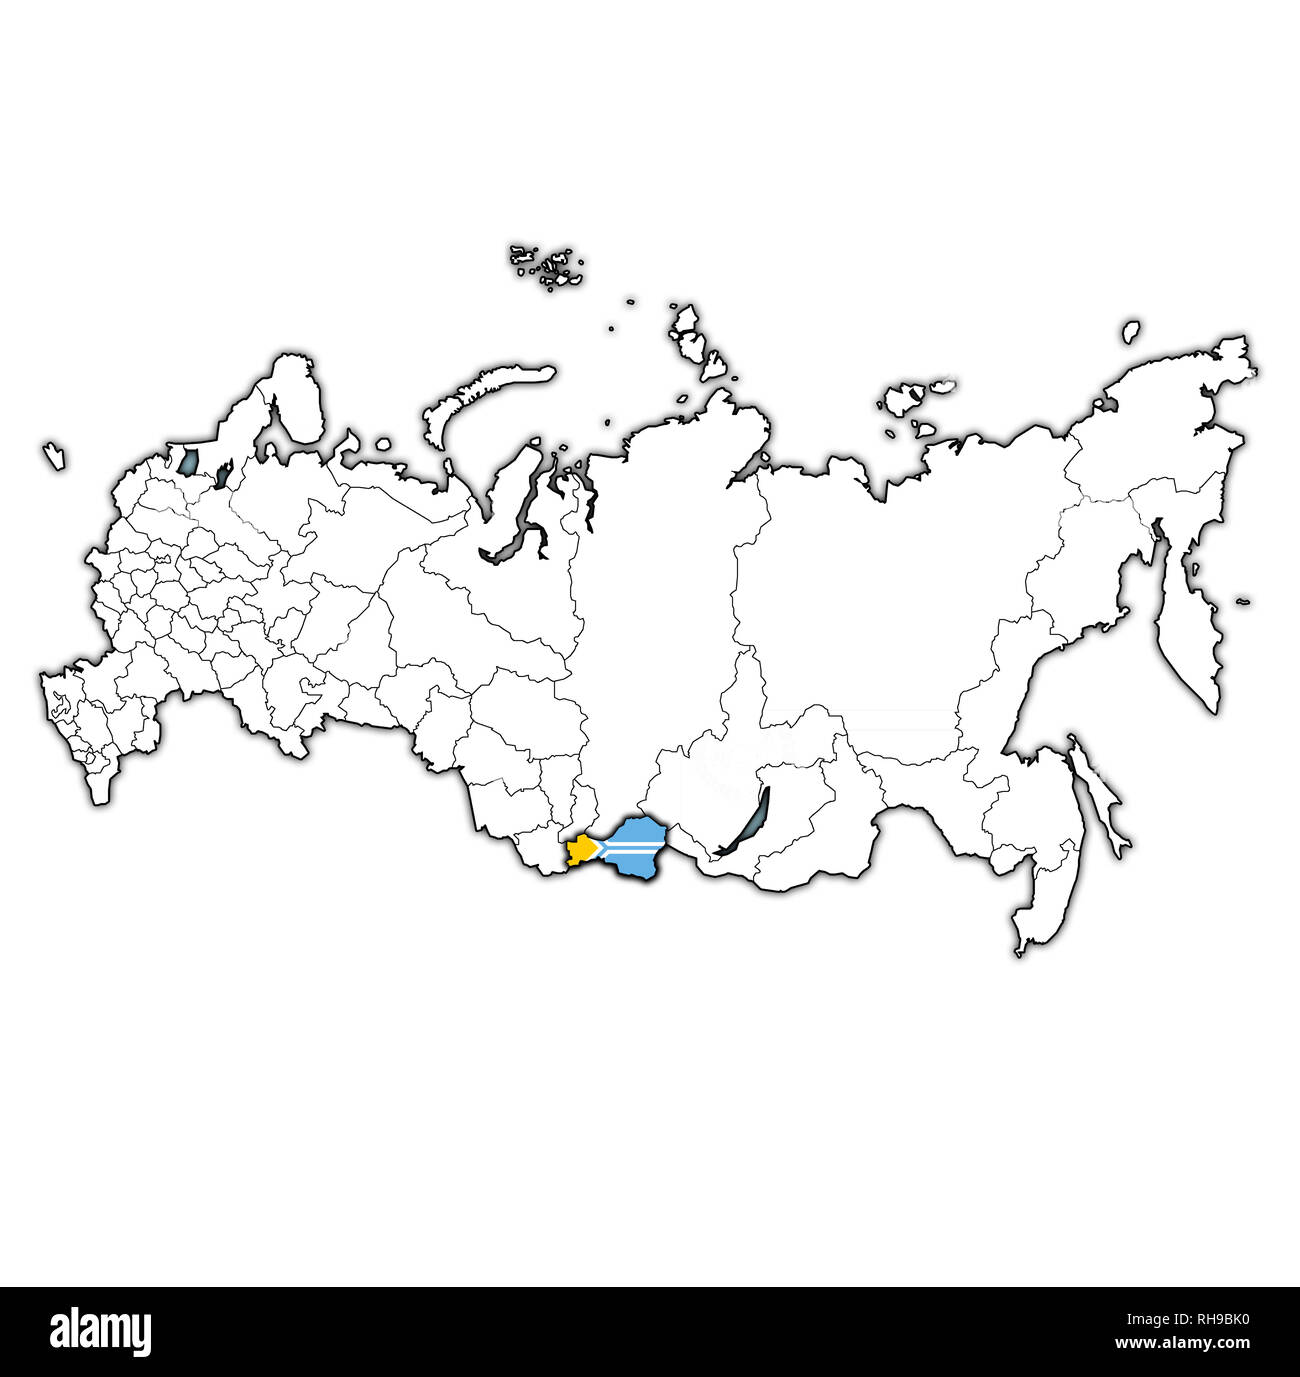 emblem of Tuva Oblast on map with administrative divisions and borders of russia Stock Photo